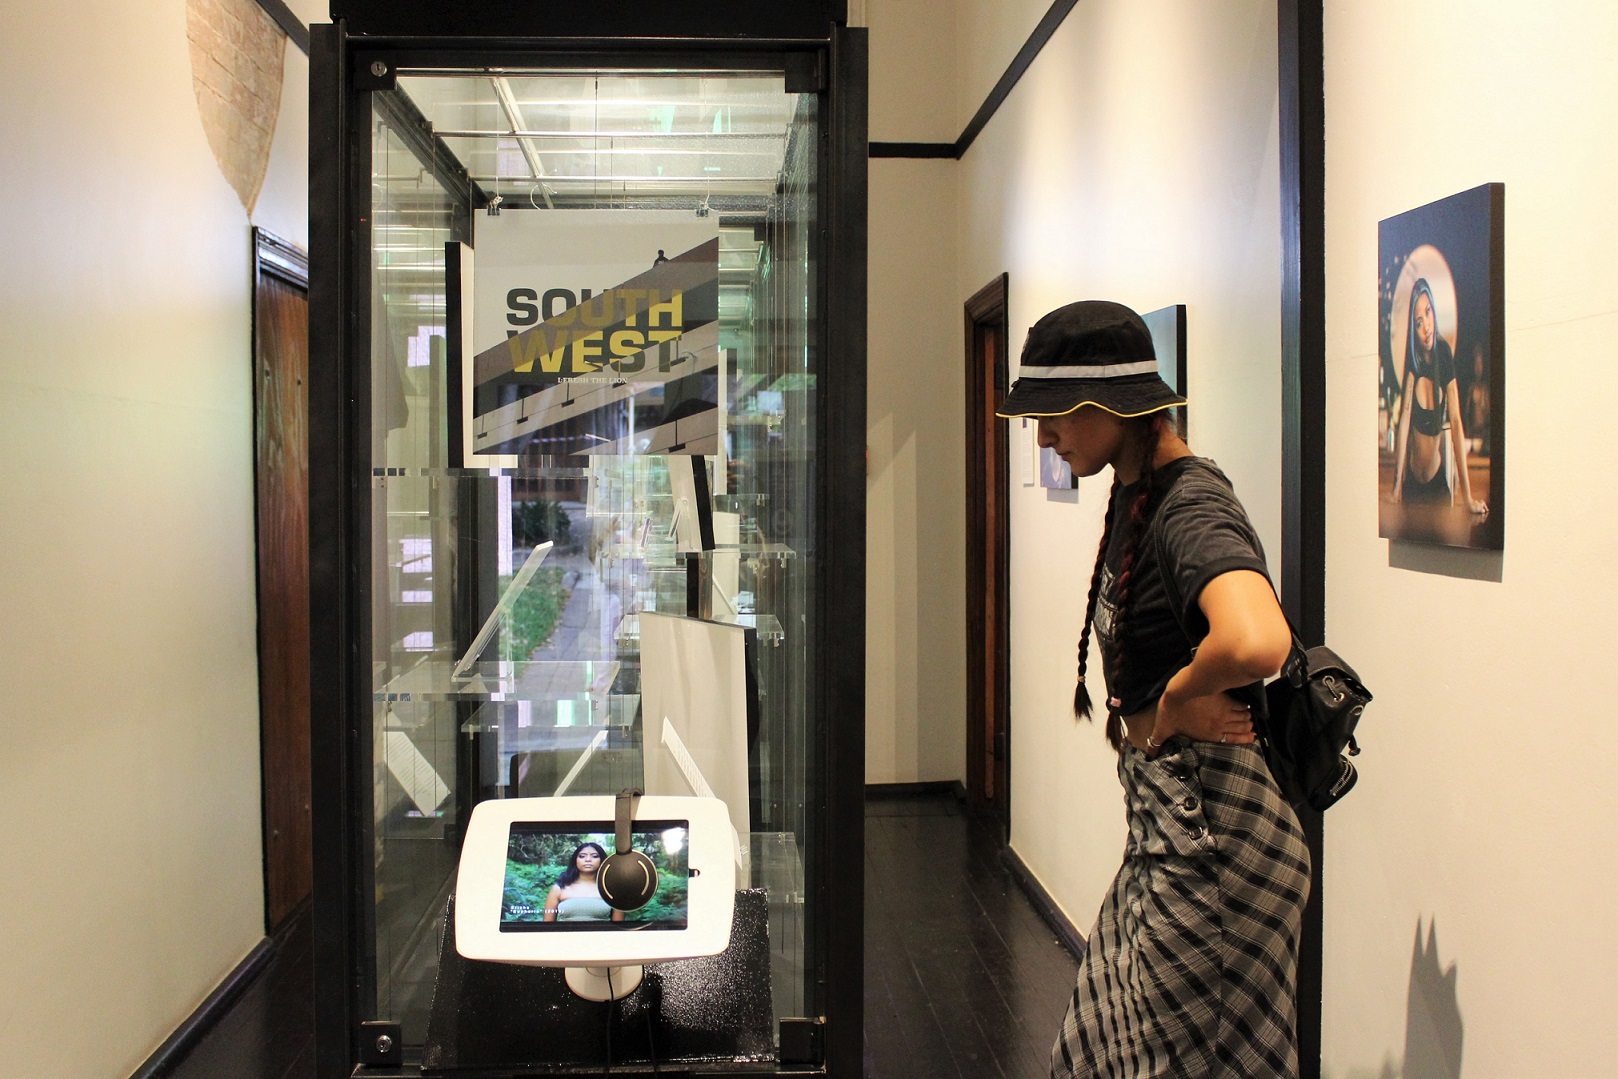 Visitor with hat looking at museum display case. Record cover displayed with the title SOUTH WEST and tablet playing music videos.